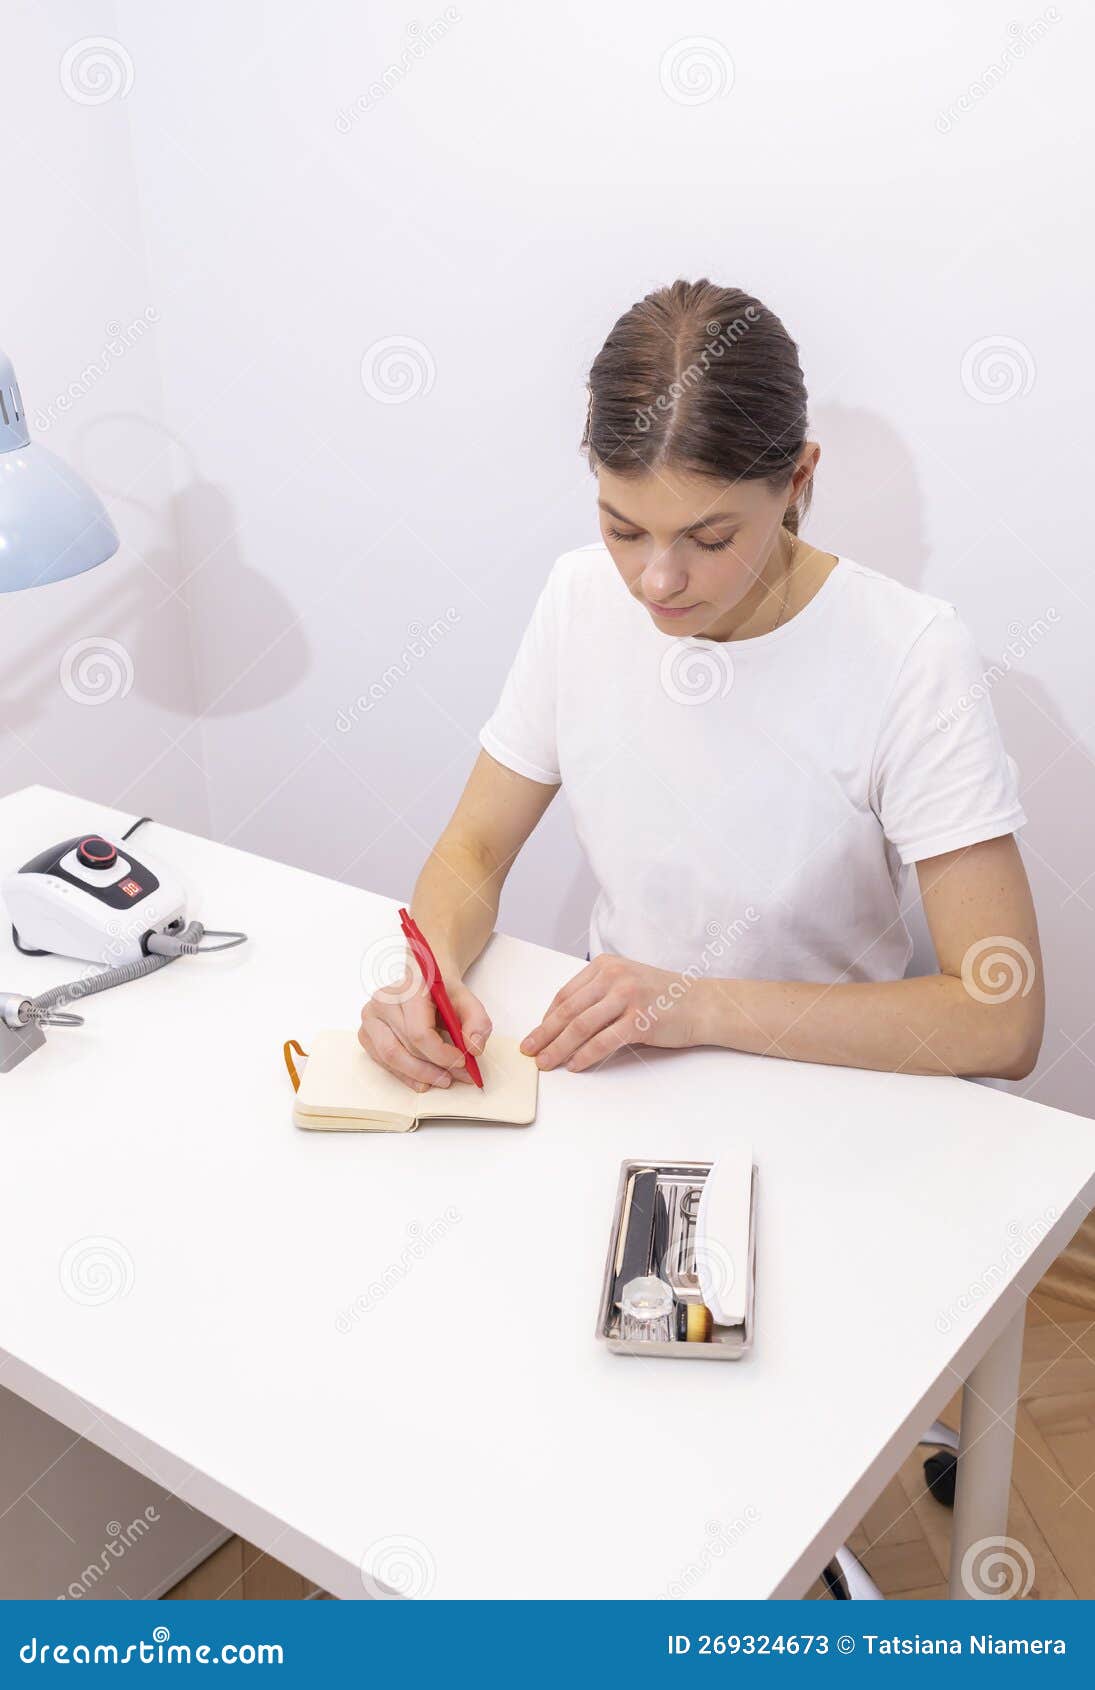 nail technician makes notes in notebook with pen, sitting at workstation, table in